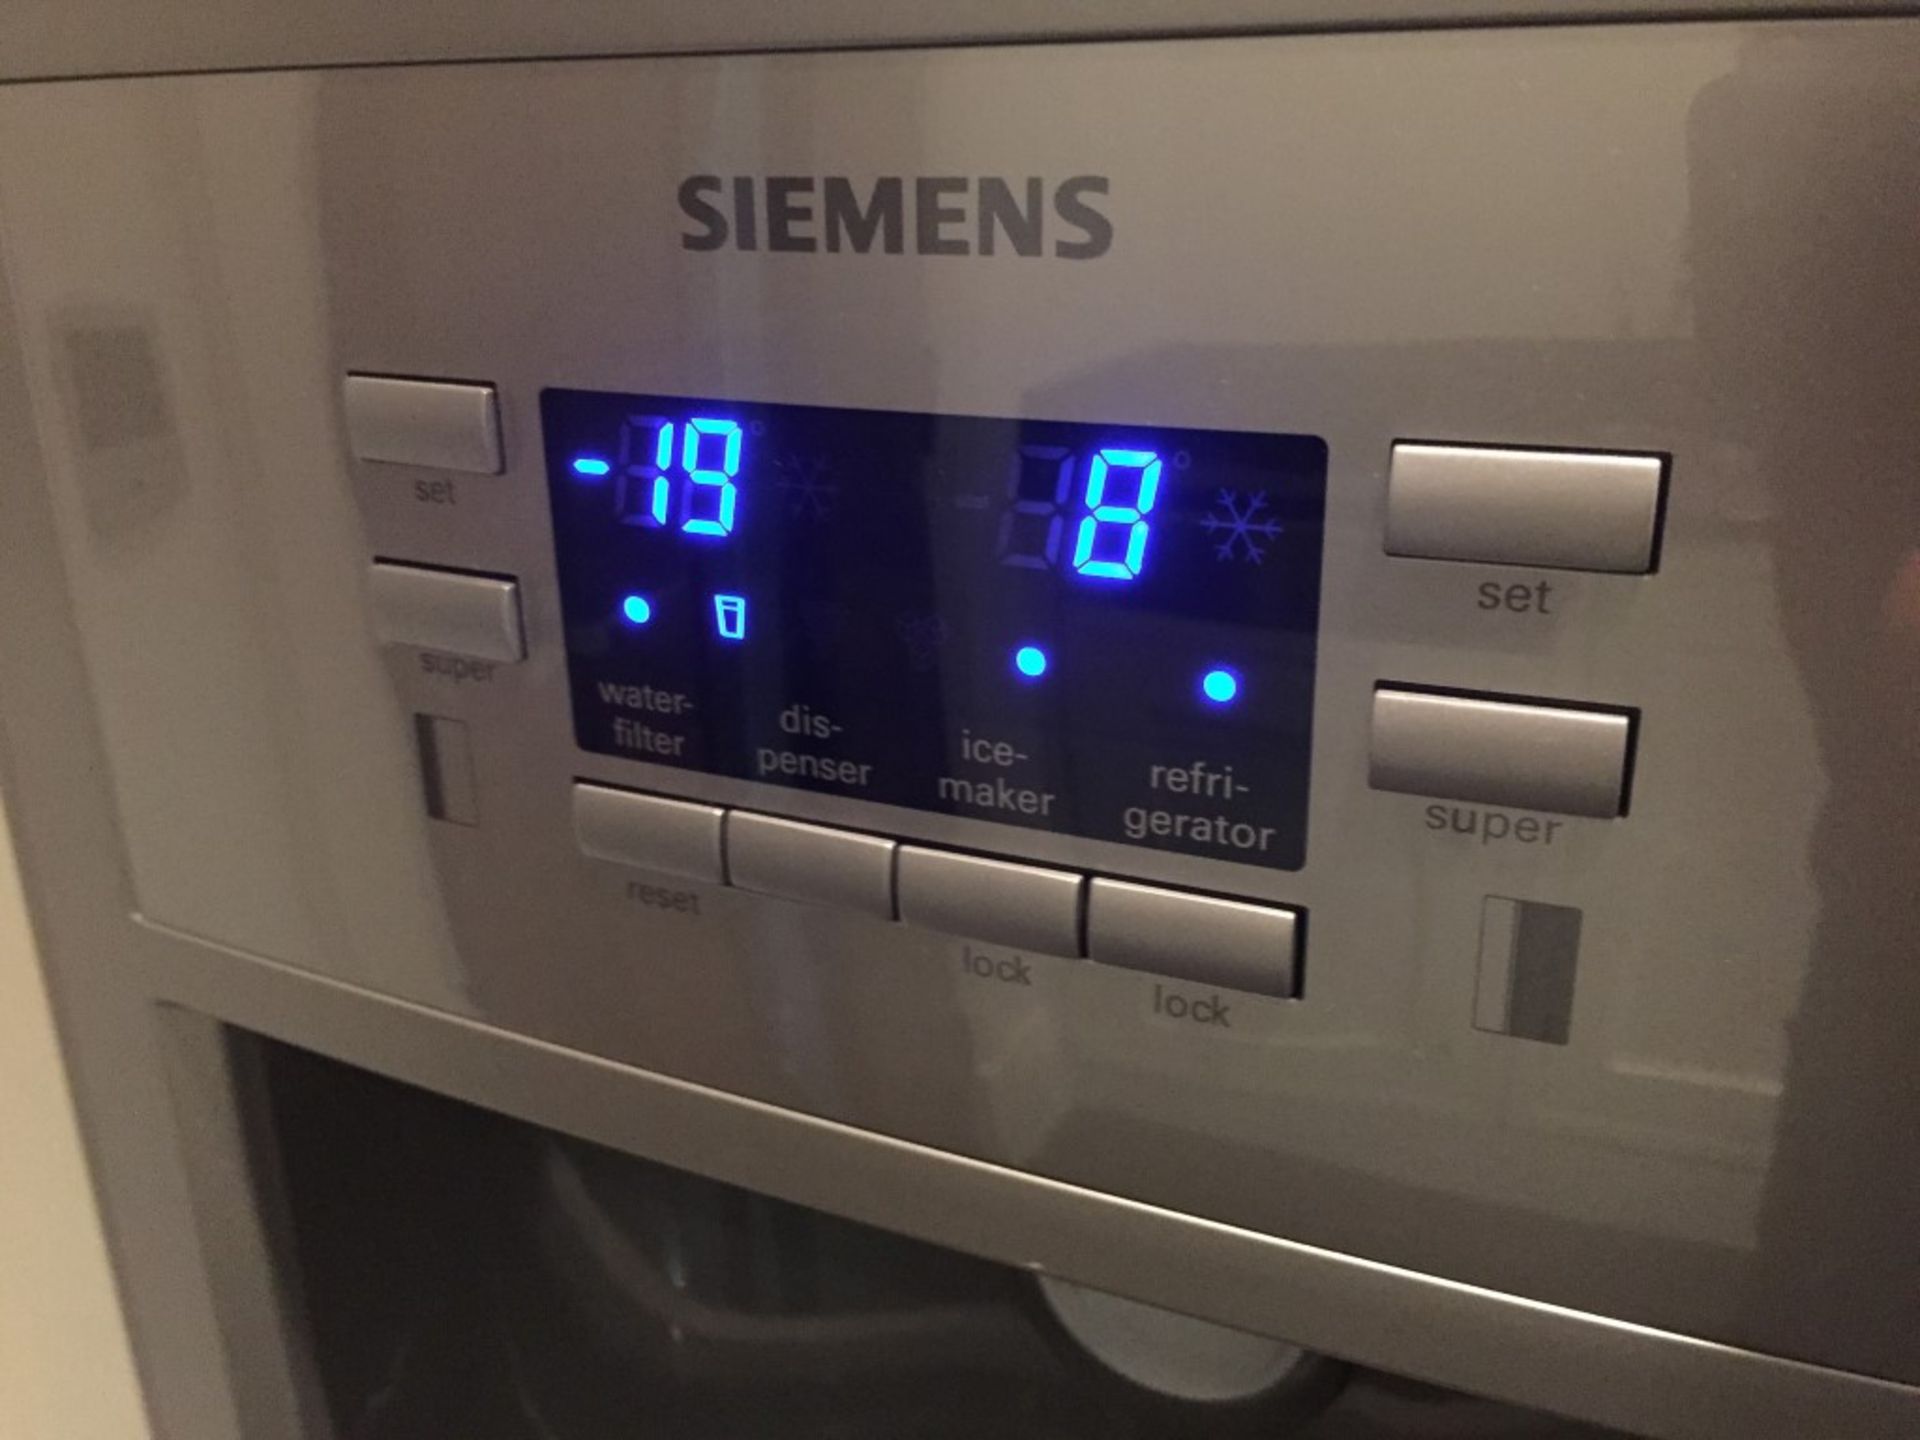 1 x Siemens American Fridge / Freezer - Approx 3-4yrs Old In Excellent Working Condition - CL211 - - Image 3 of 8